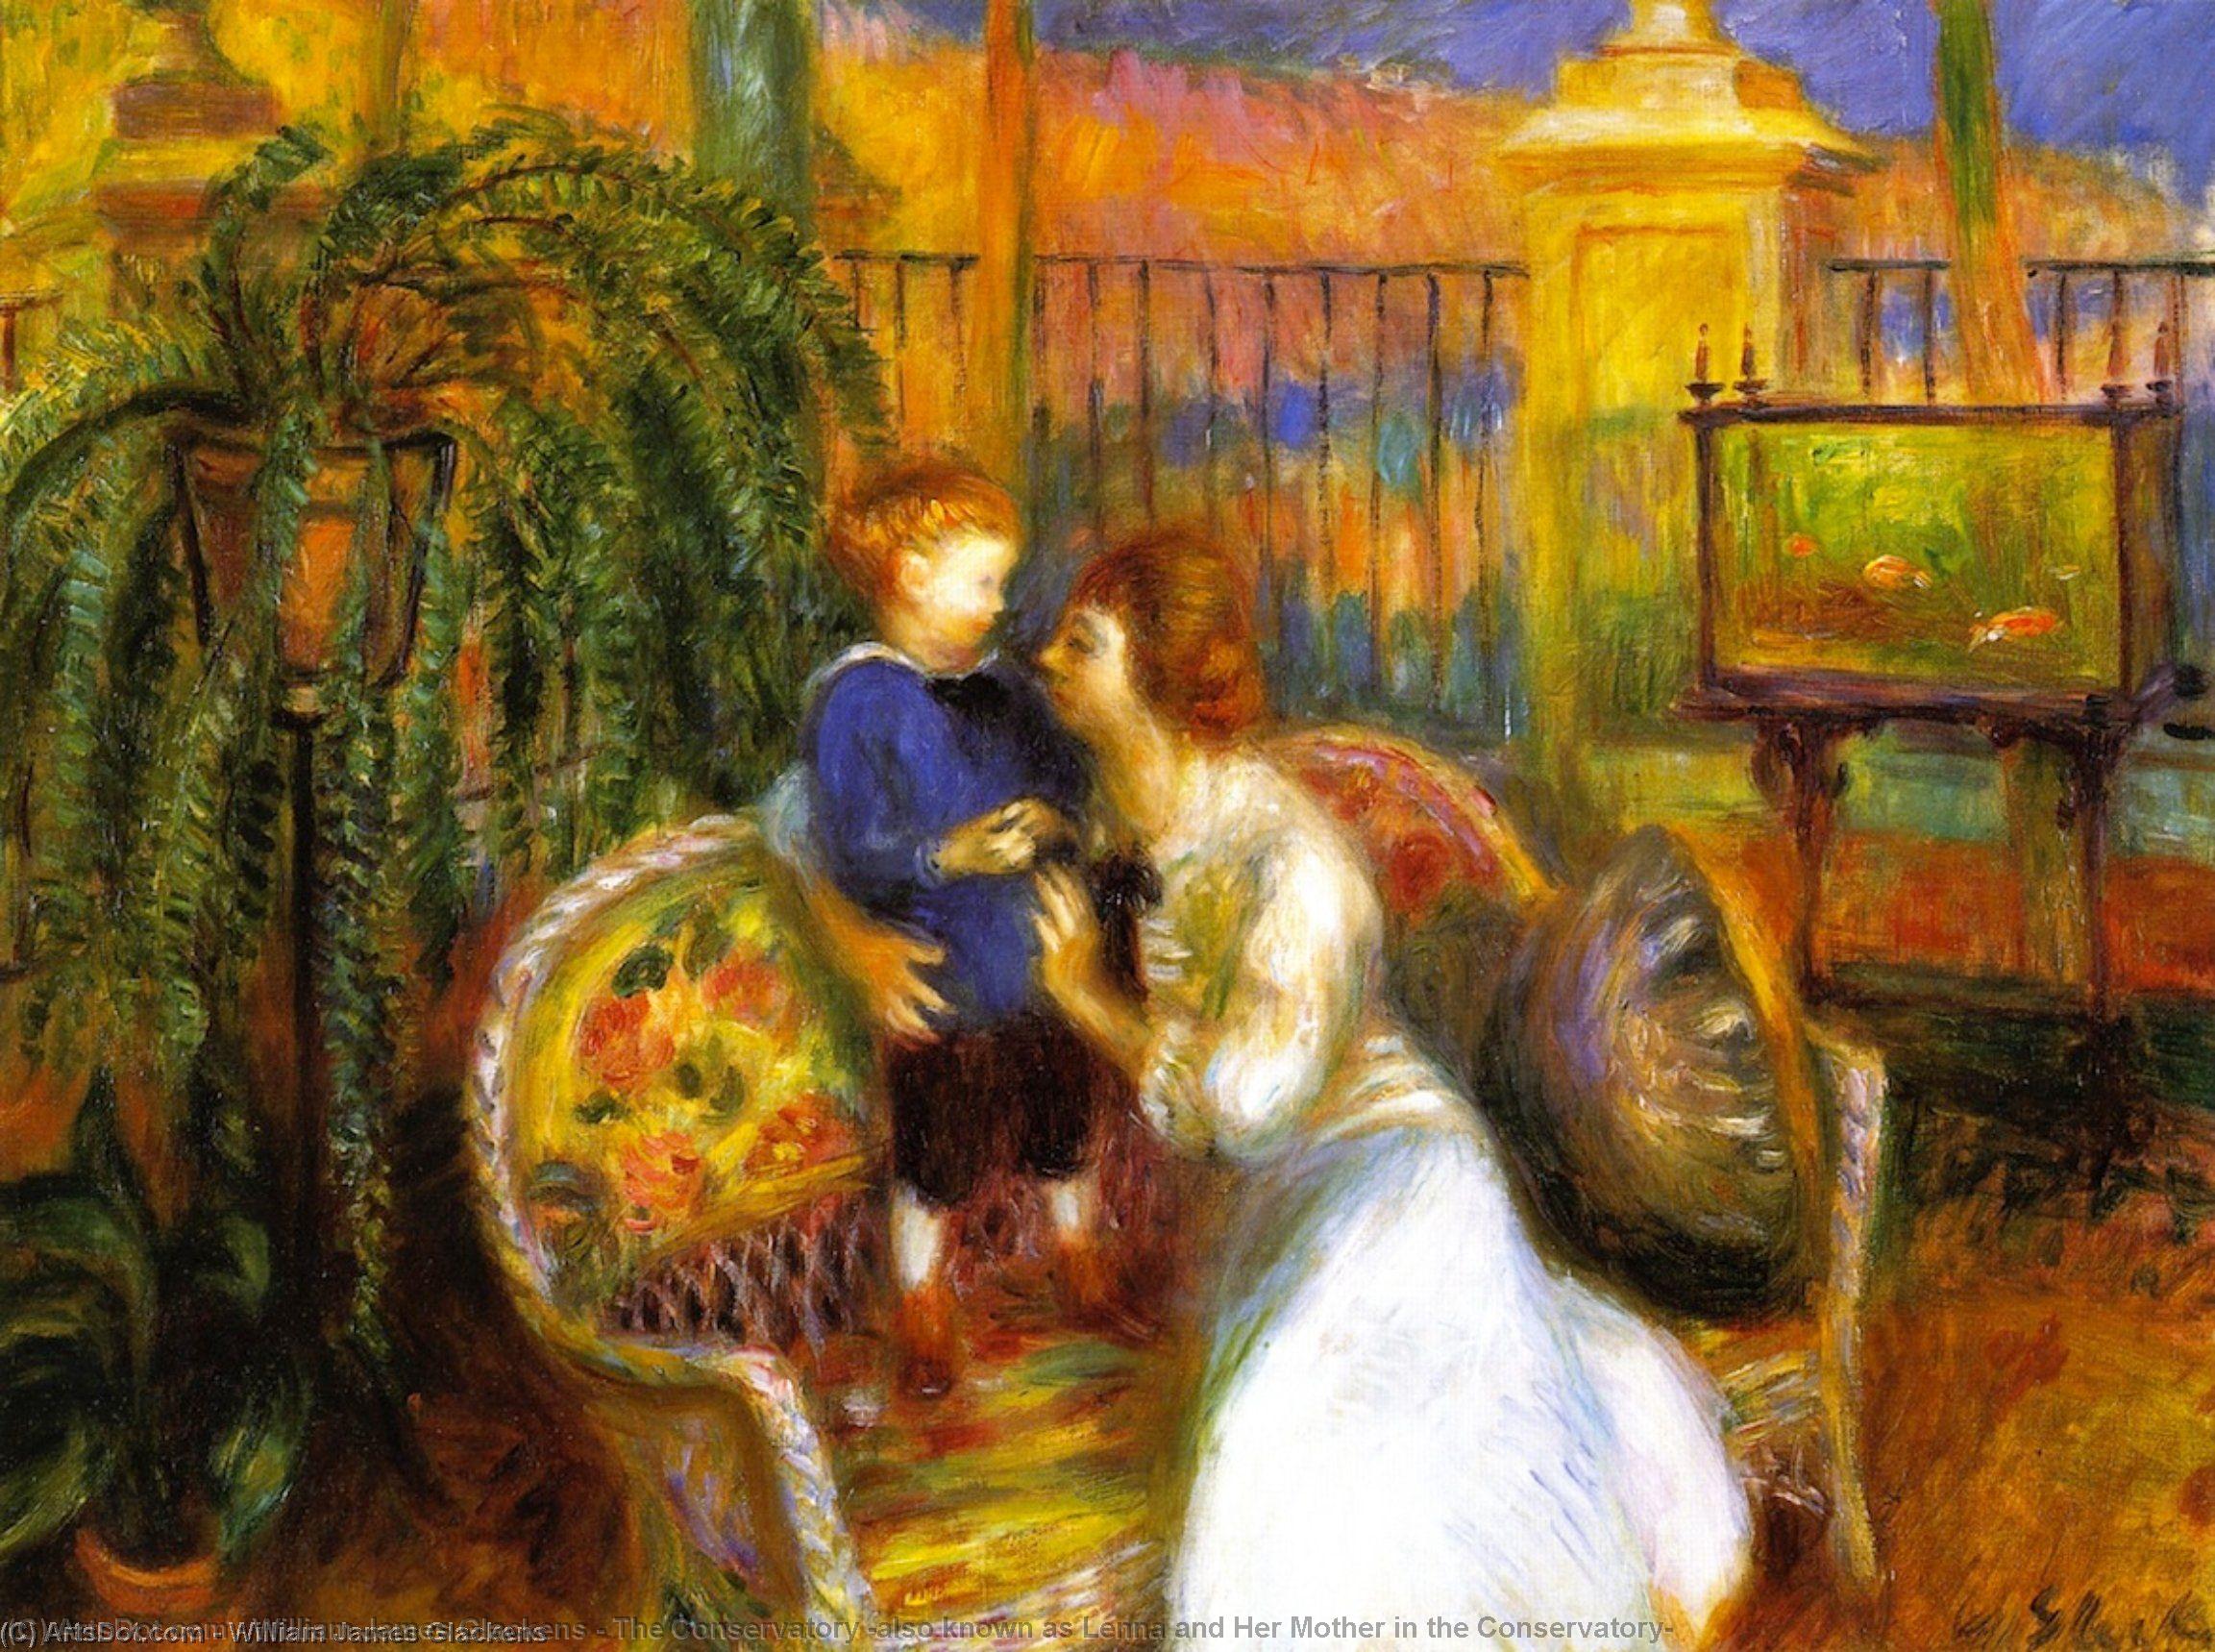 Wikioo.org - Bách khoa toàn thư về mỹ thuật - Vẽ tranh, Tác phẩm nghệ thuật William James Glackens - The Conservatory (also known as Lenna and Her Mother in the Conservatory)